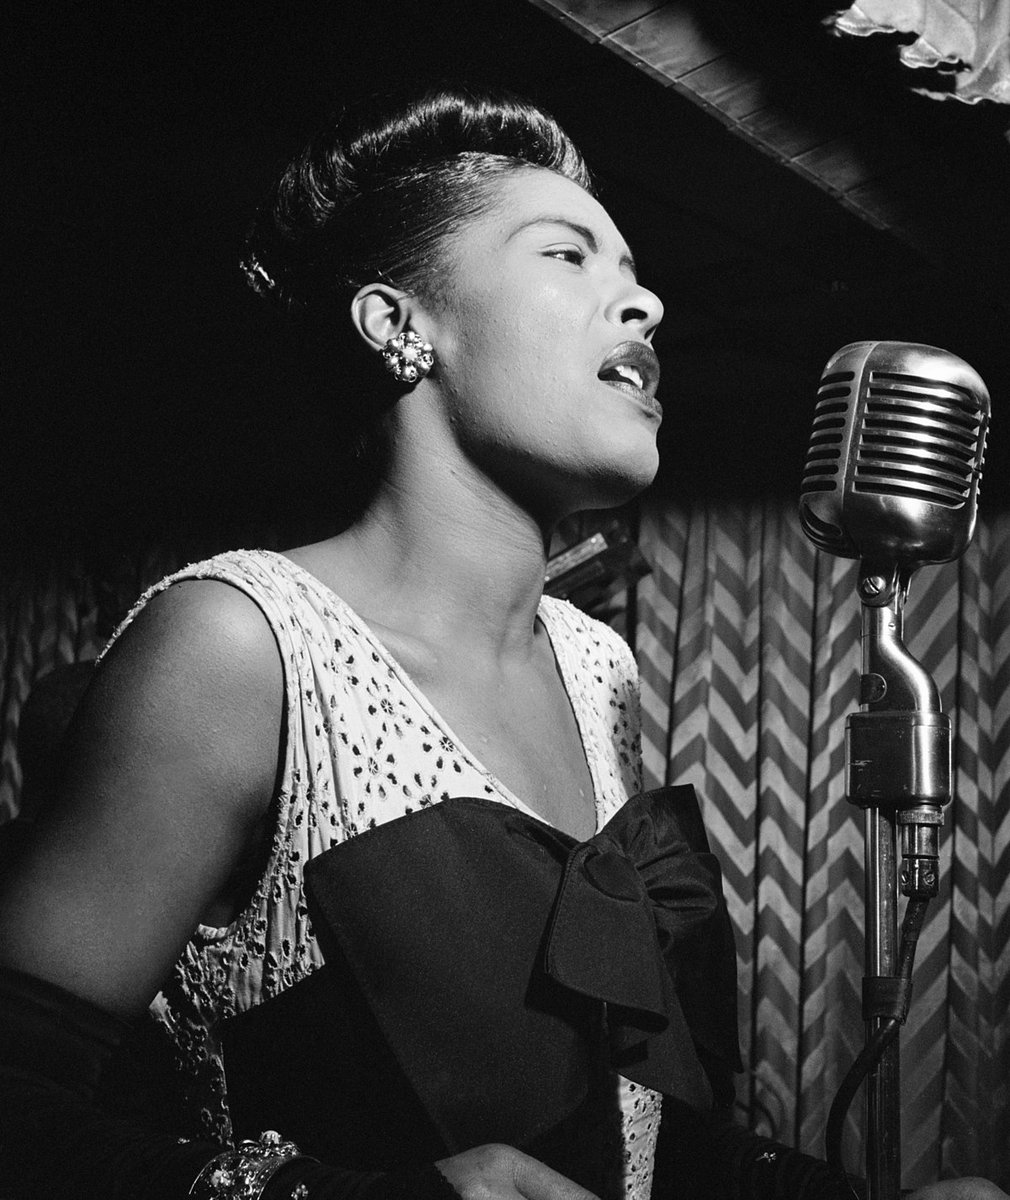 An artist whose sound defined a generation, Billie Holiday’s unique style of Baltimore blues won her four Grammy Awards and led to her induction into the National Rhythm & Blues Hall of Fame. She is widely recognized as one of the greatest jazz and blues artists of all time.